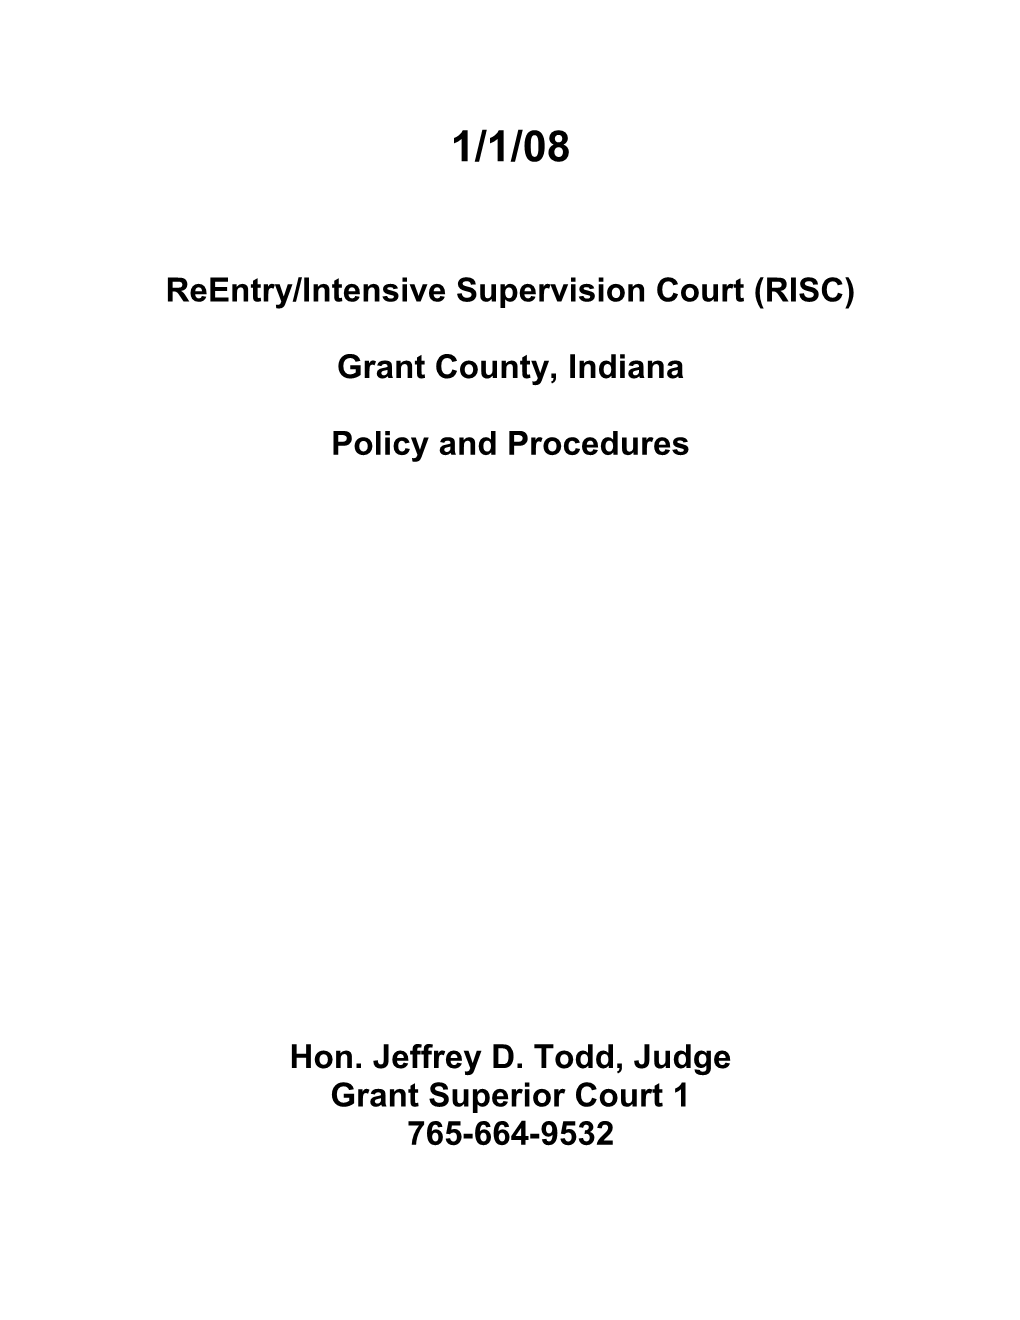 Reentry/Intensive Supervision Court (RISC)